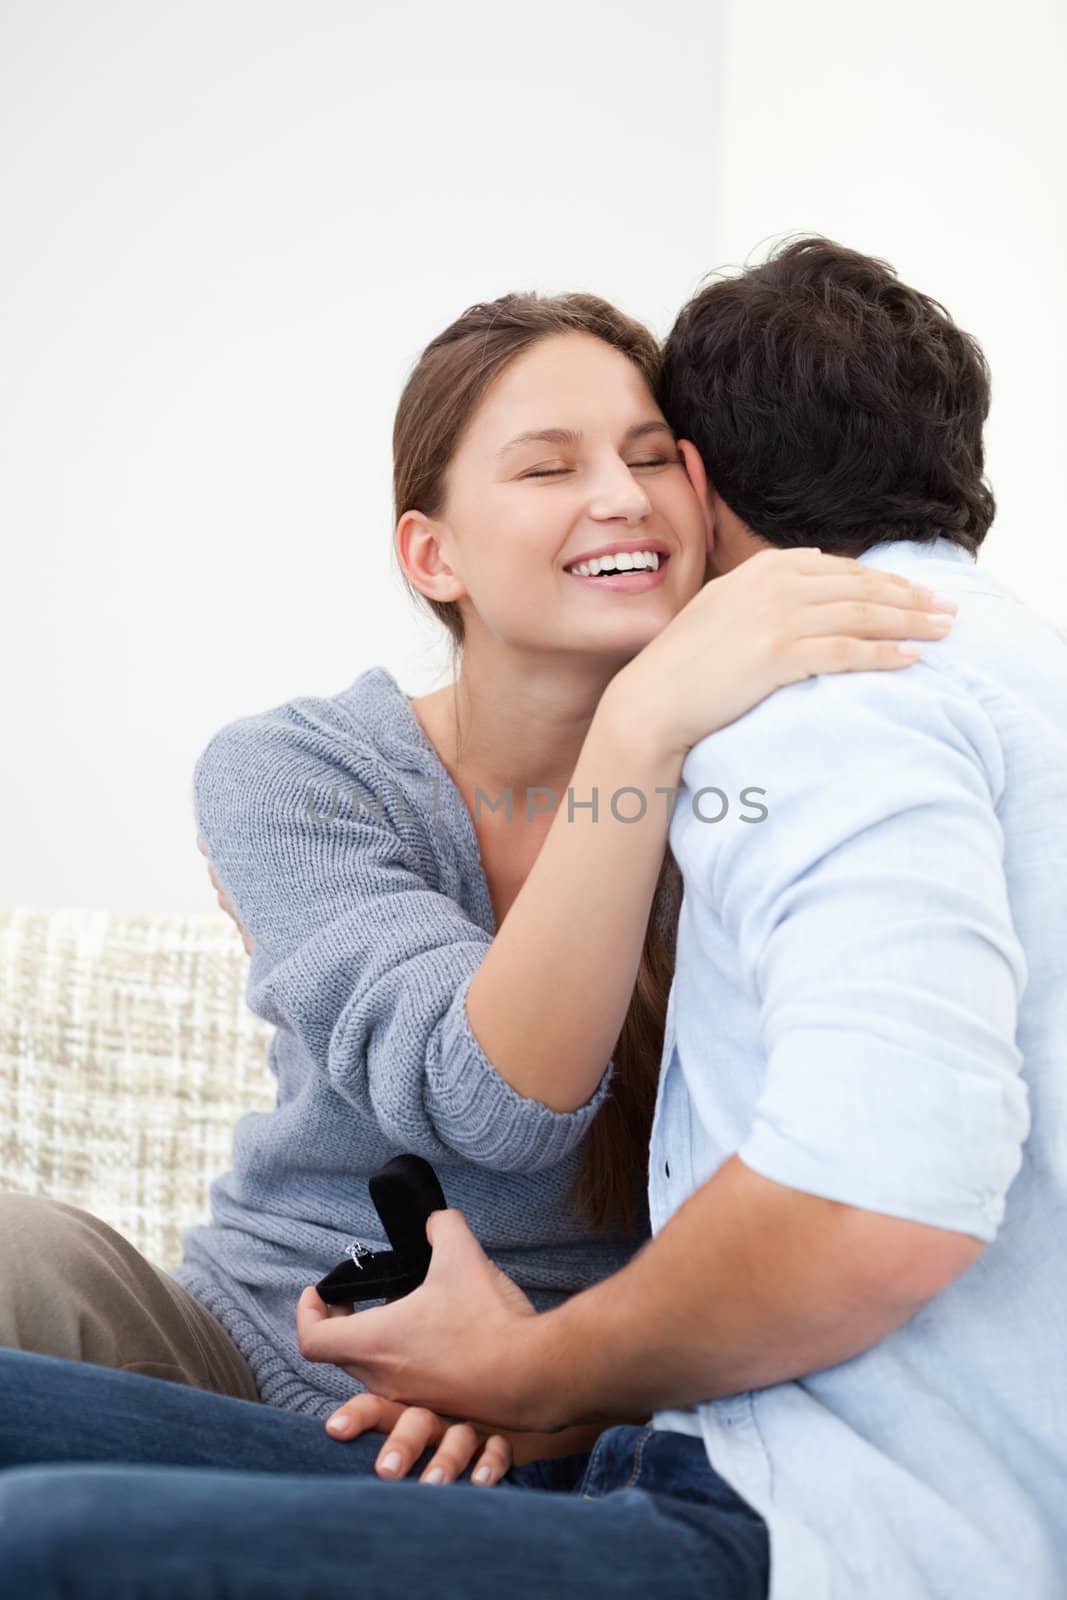 Couple embracing eachother while holding a jewel case  by Wavebreakmedia